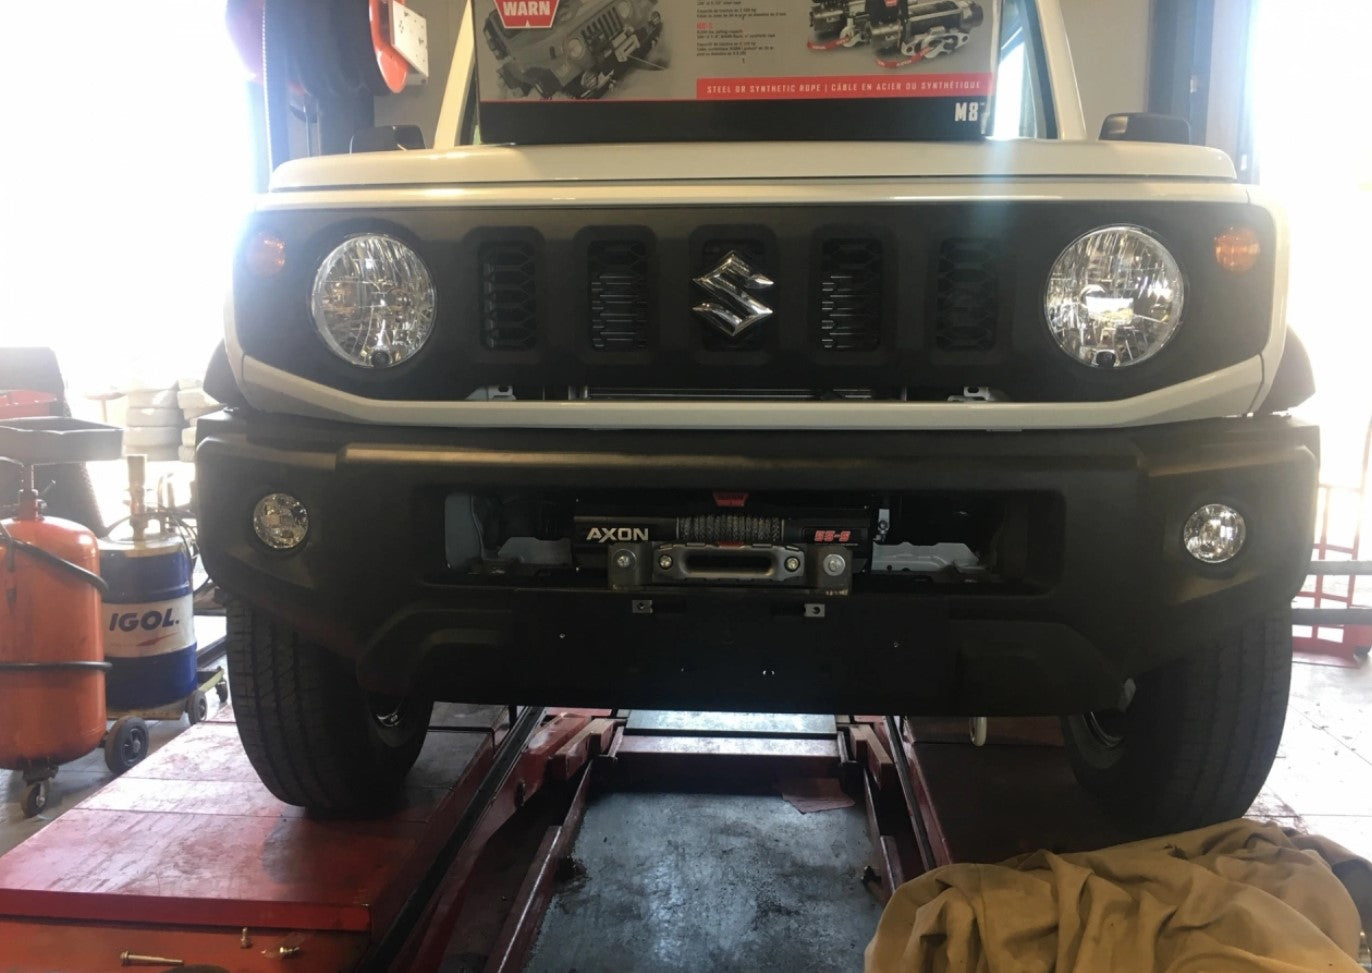 suzuki jimny front view with Axon winch behind the bumper